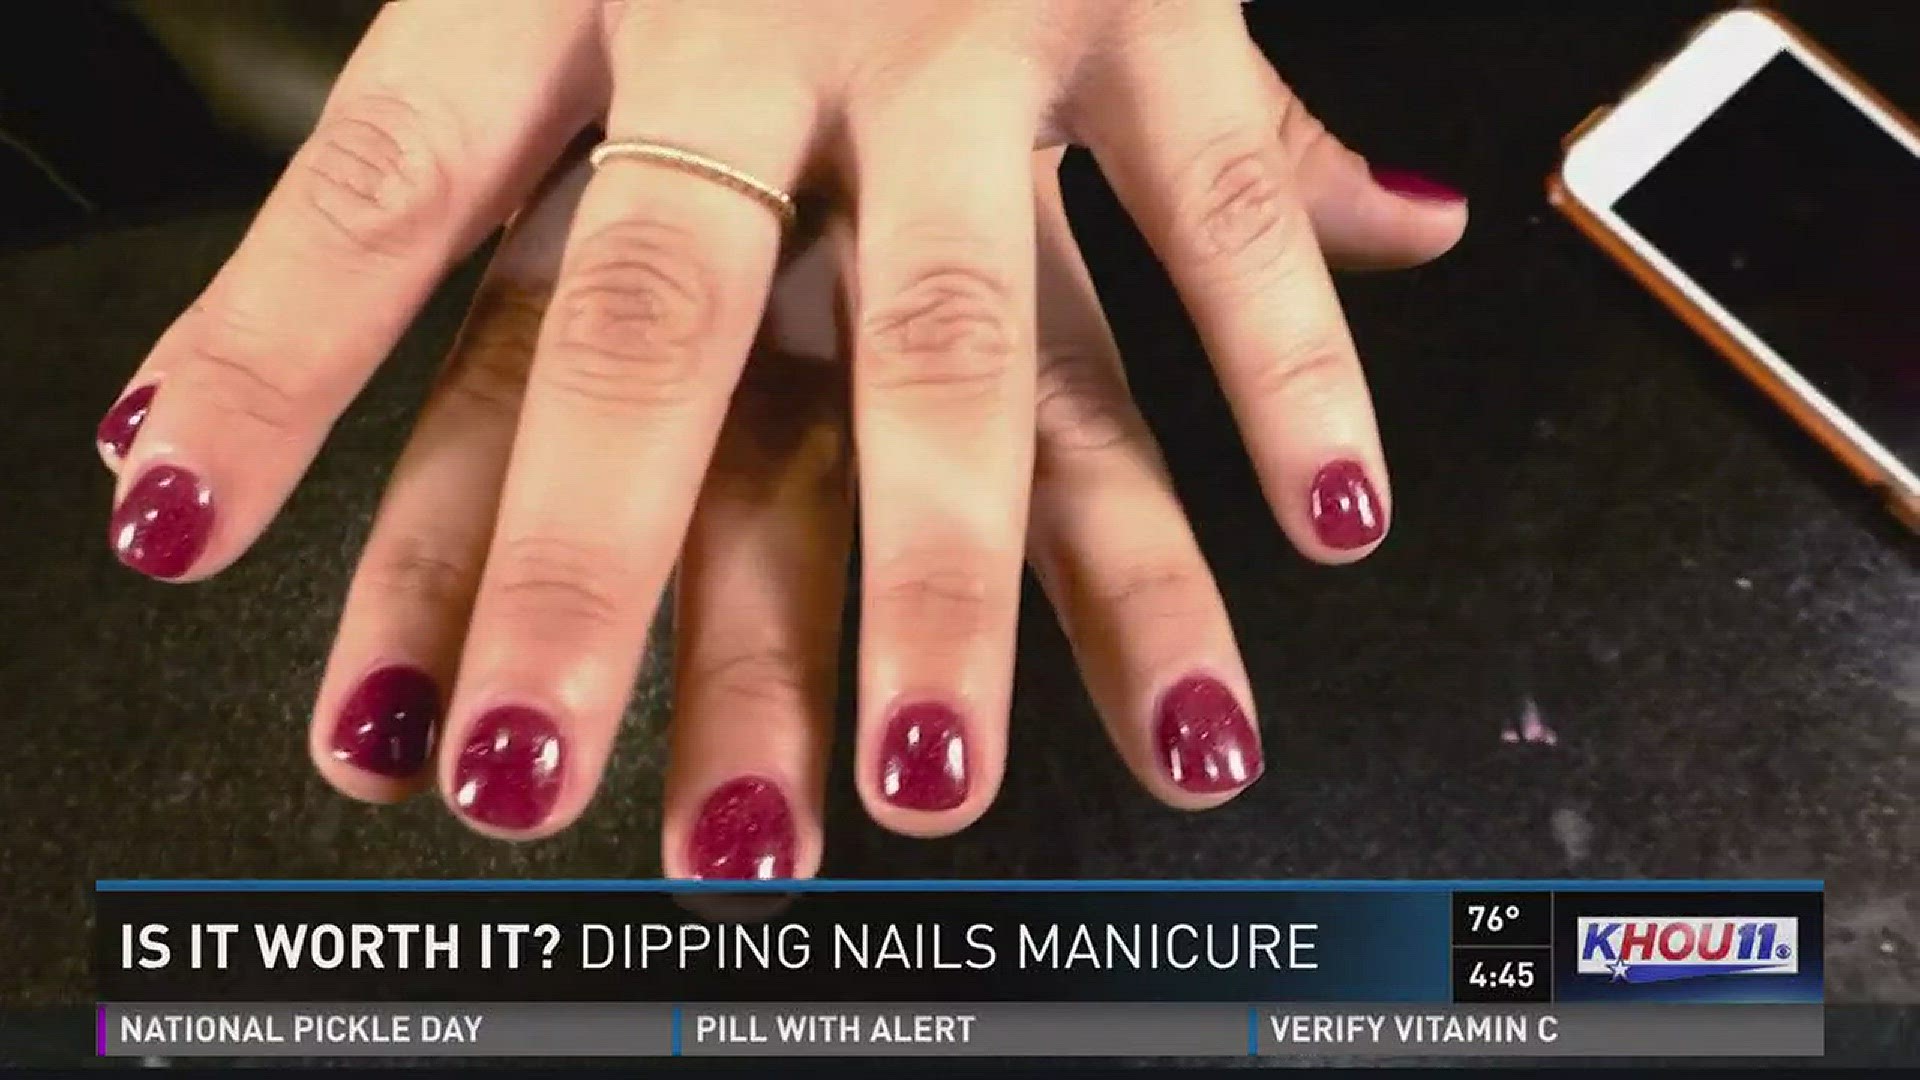 Dipping nails is a hot new manicure trend that's attracting customers because they last up to a month. But at an average price of $45, is it worth it? You decide.